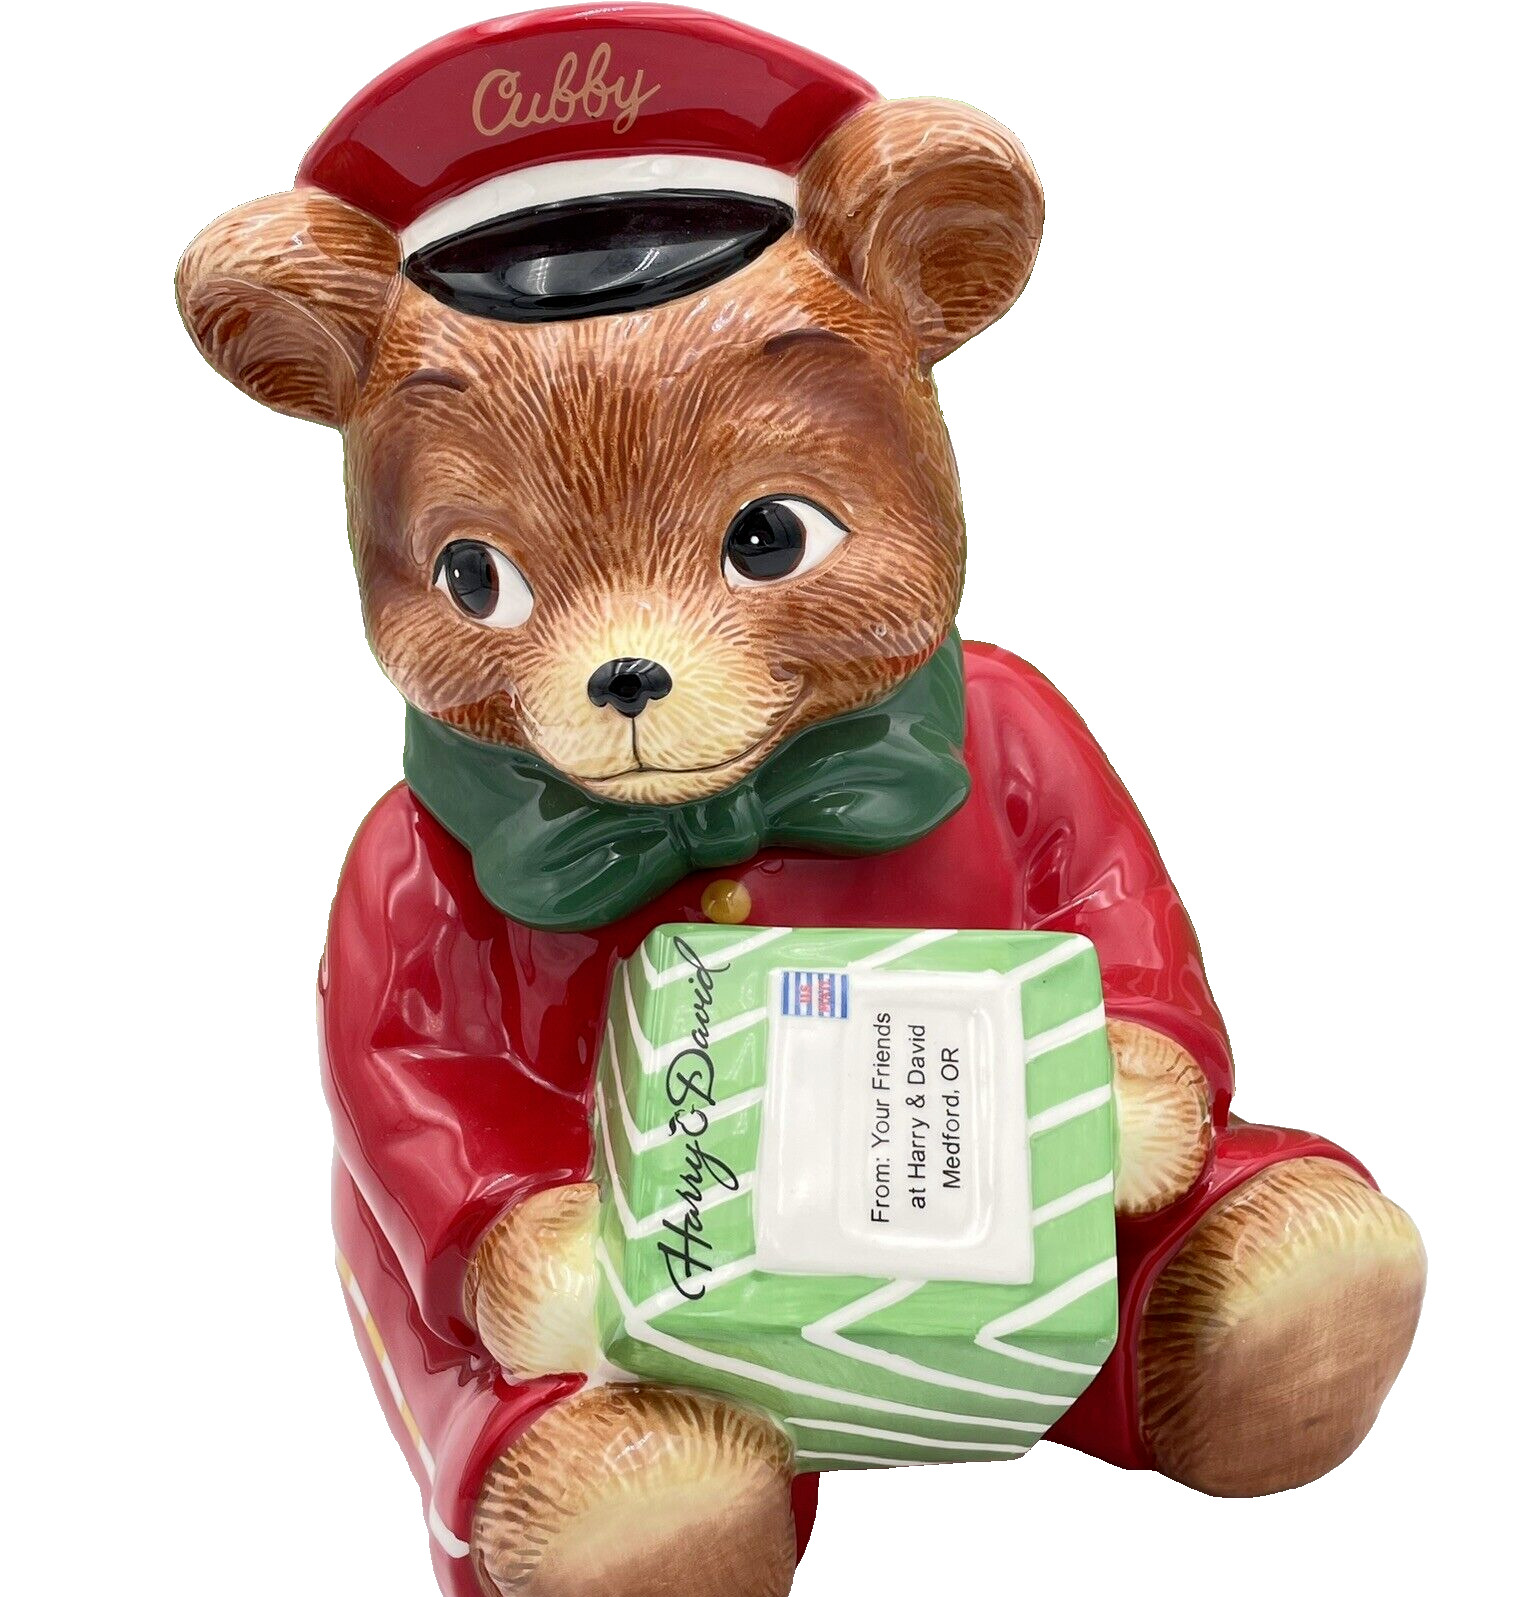 Harry and David Ceramic Cookie Jar 2010 Limited Edition Cubby Bear Delivery Boy